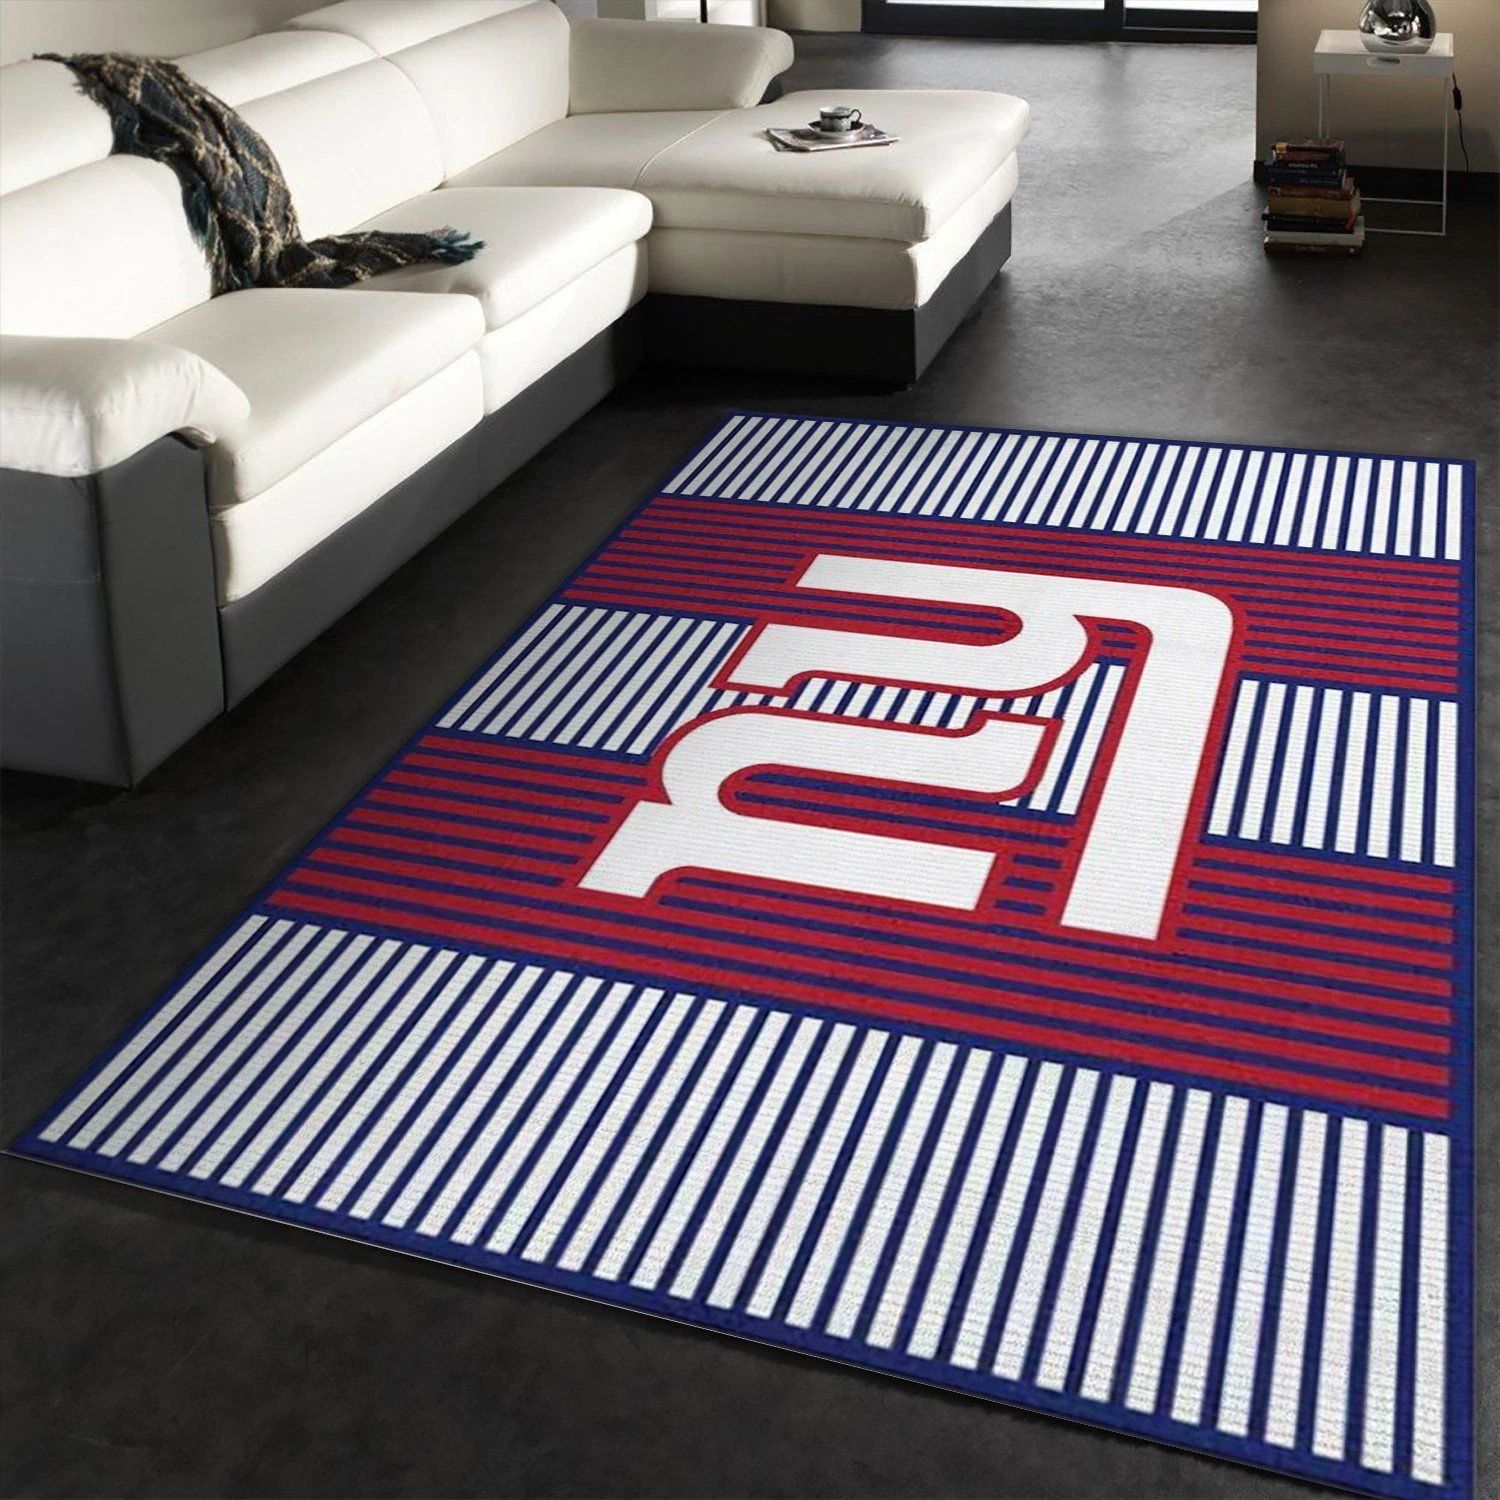 New York Giants Imperial Champion Rug NFL Team Logos Area Rug, Bedroom, Christmas Gift US Decor - Indoor Outdoor Rugs